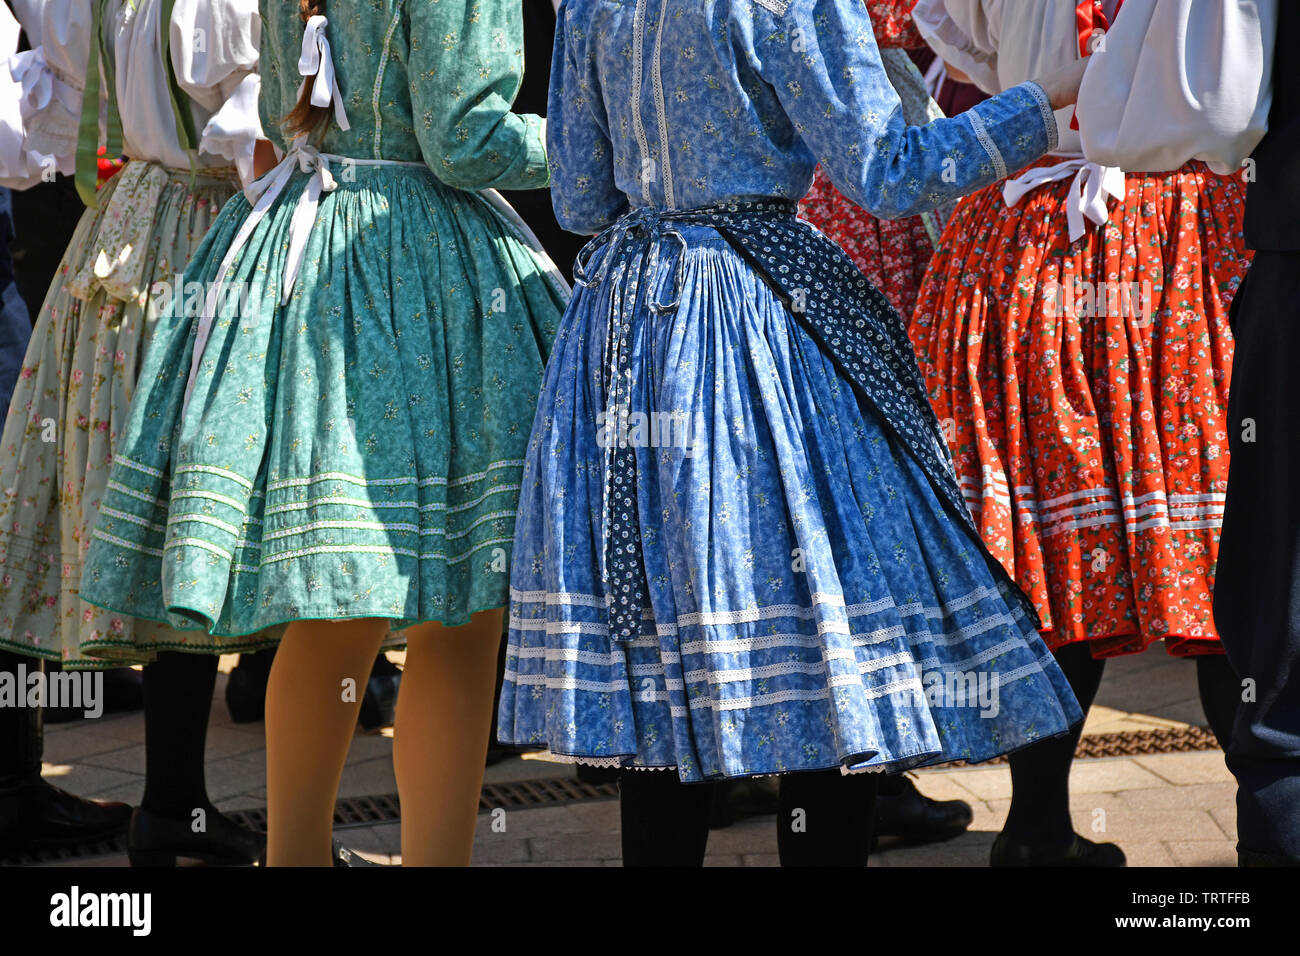 Folk dancers in traditional clothing Stock Photo